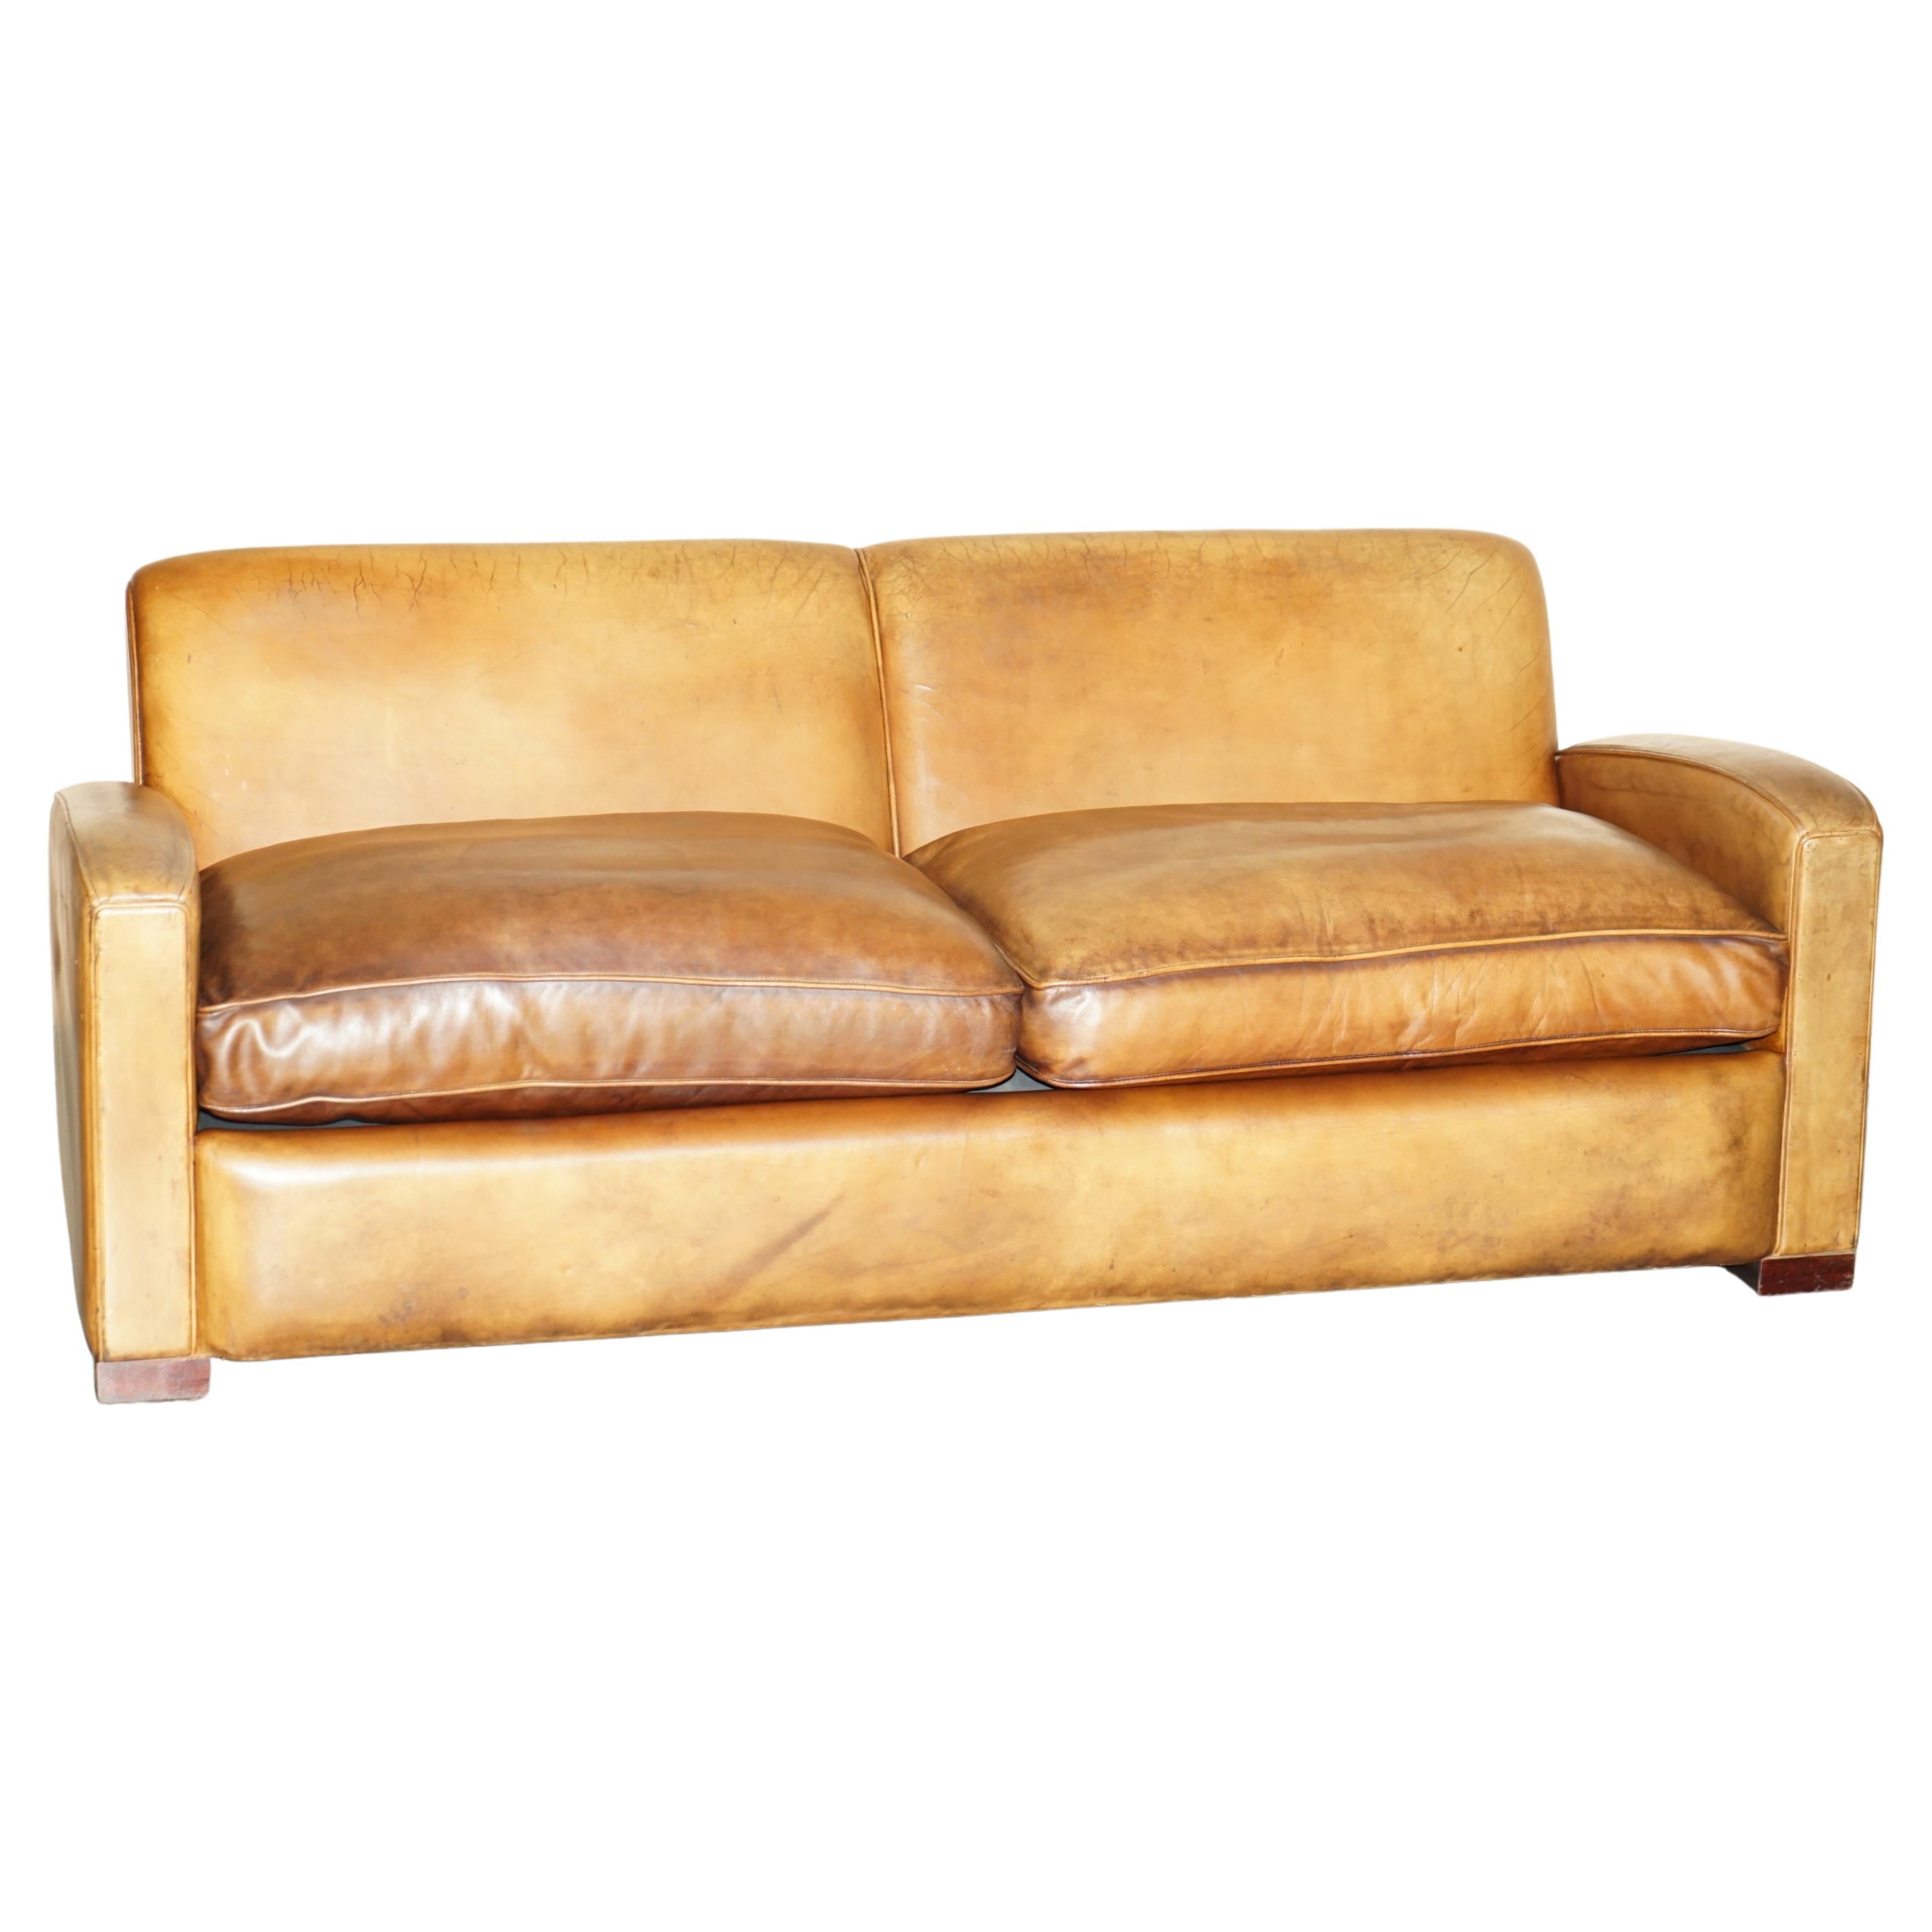 Hand Dyed Brown Leather Art Deco Odeon Style Three Seat Sofa Feather Filled Seat